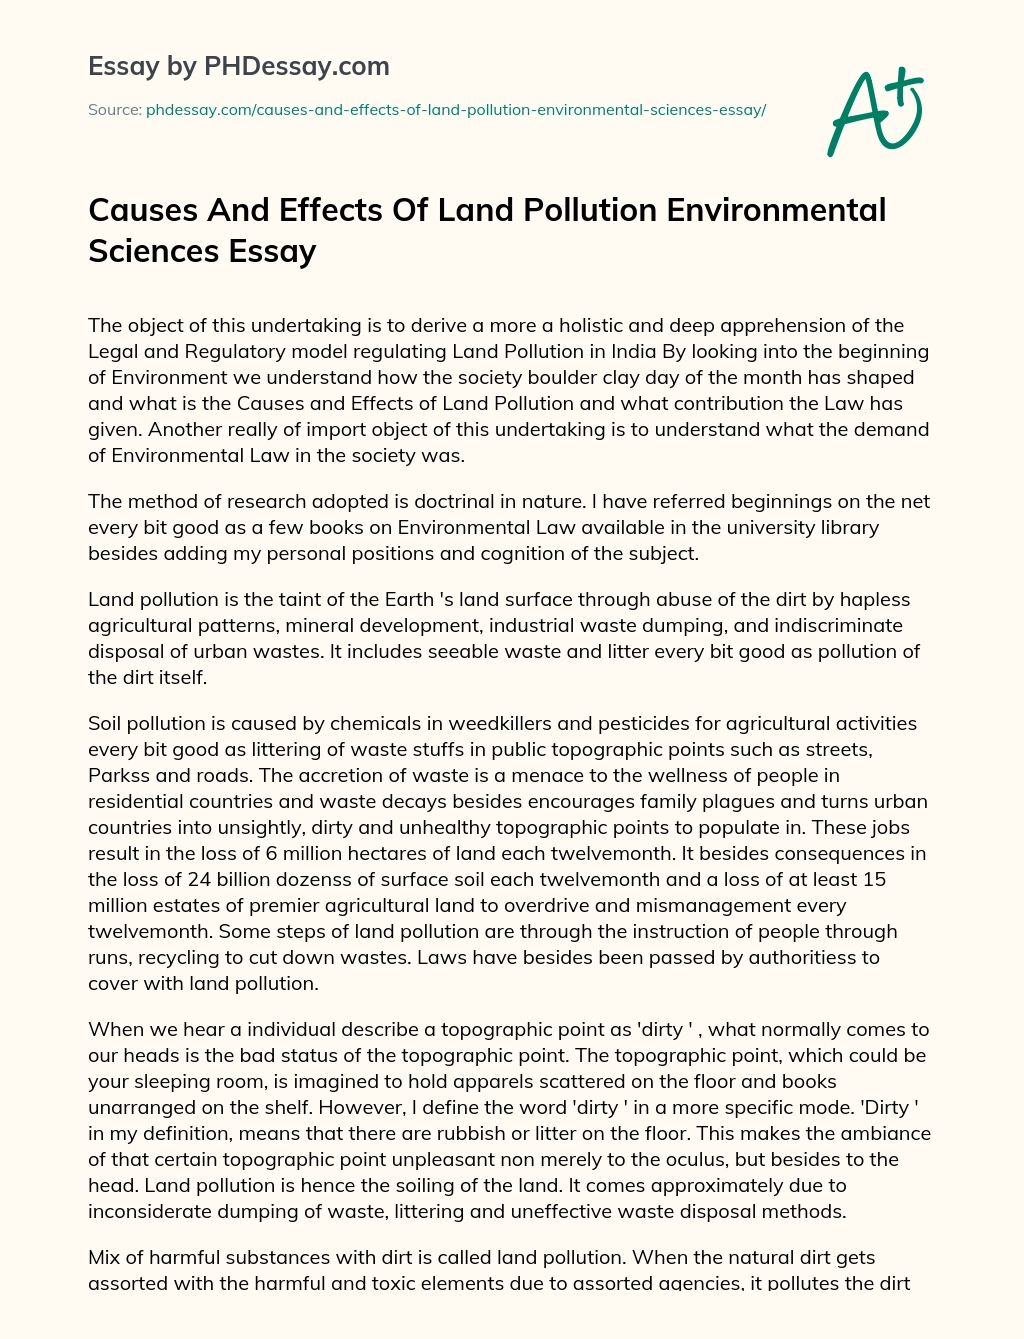 Causes And Effects Of Land Pollution Environmental Sciences Essay essay